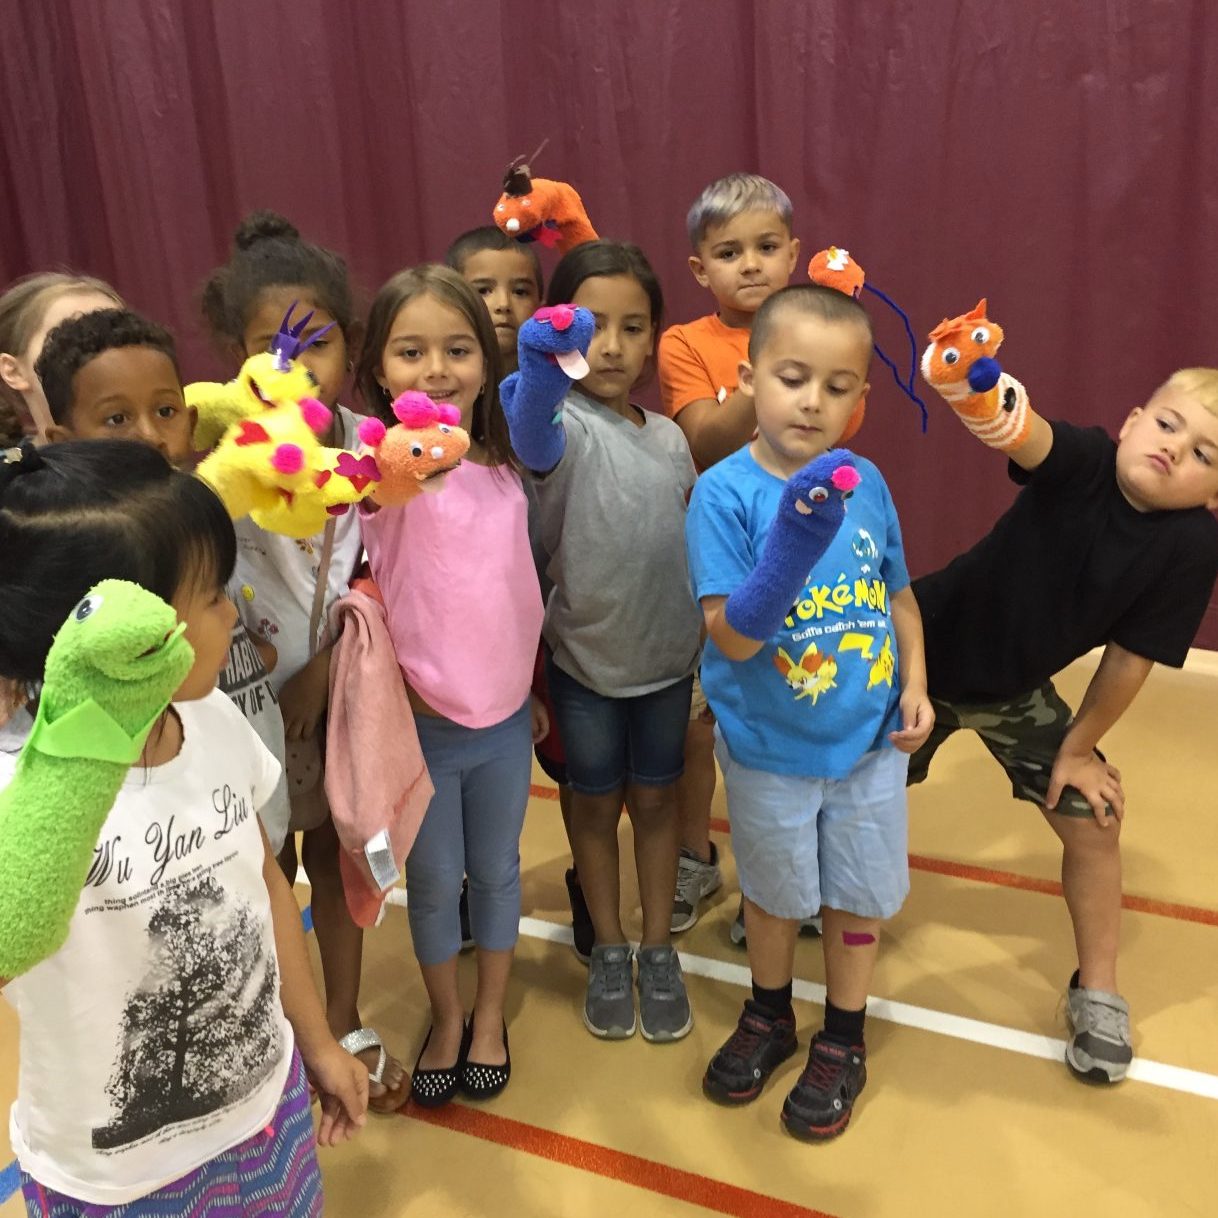 A photo of the Empowerment Factory's activity that let children create socket puppets